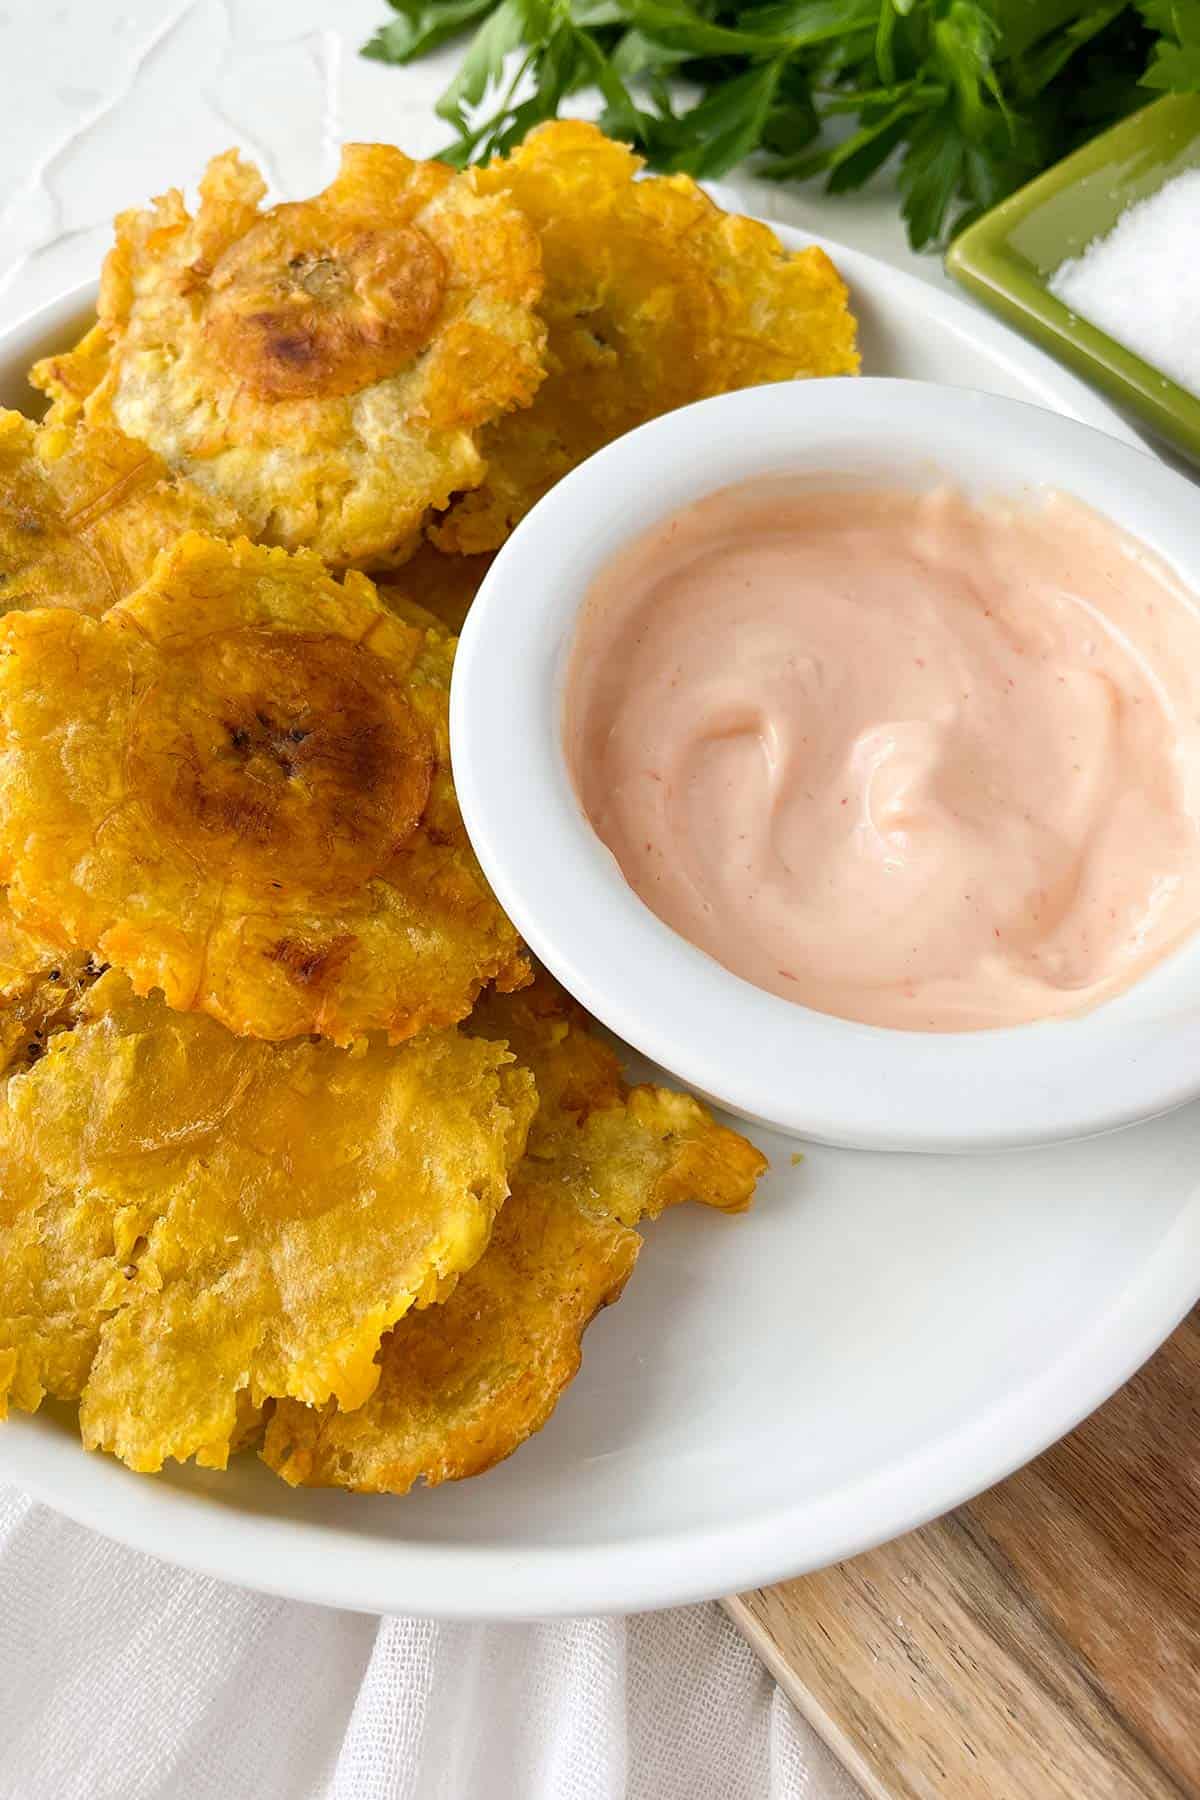 fried green plantains with a side of mayoketchup sauce on the side.